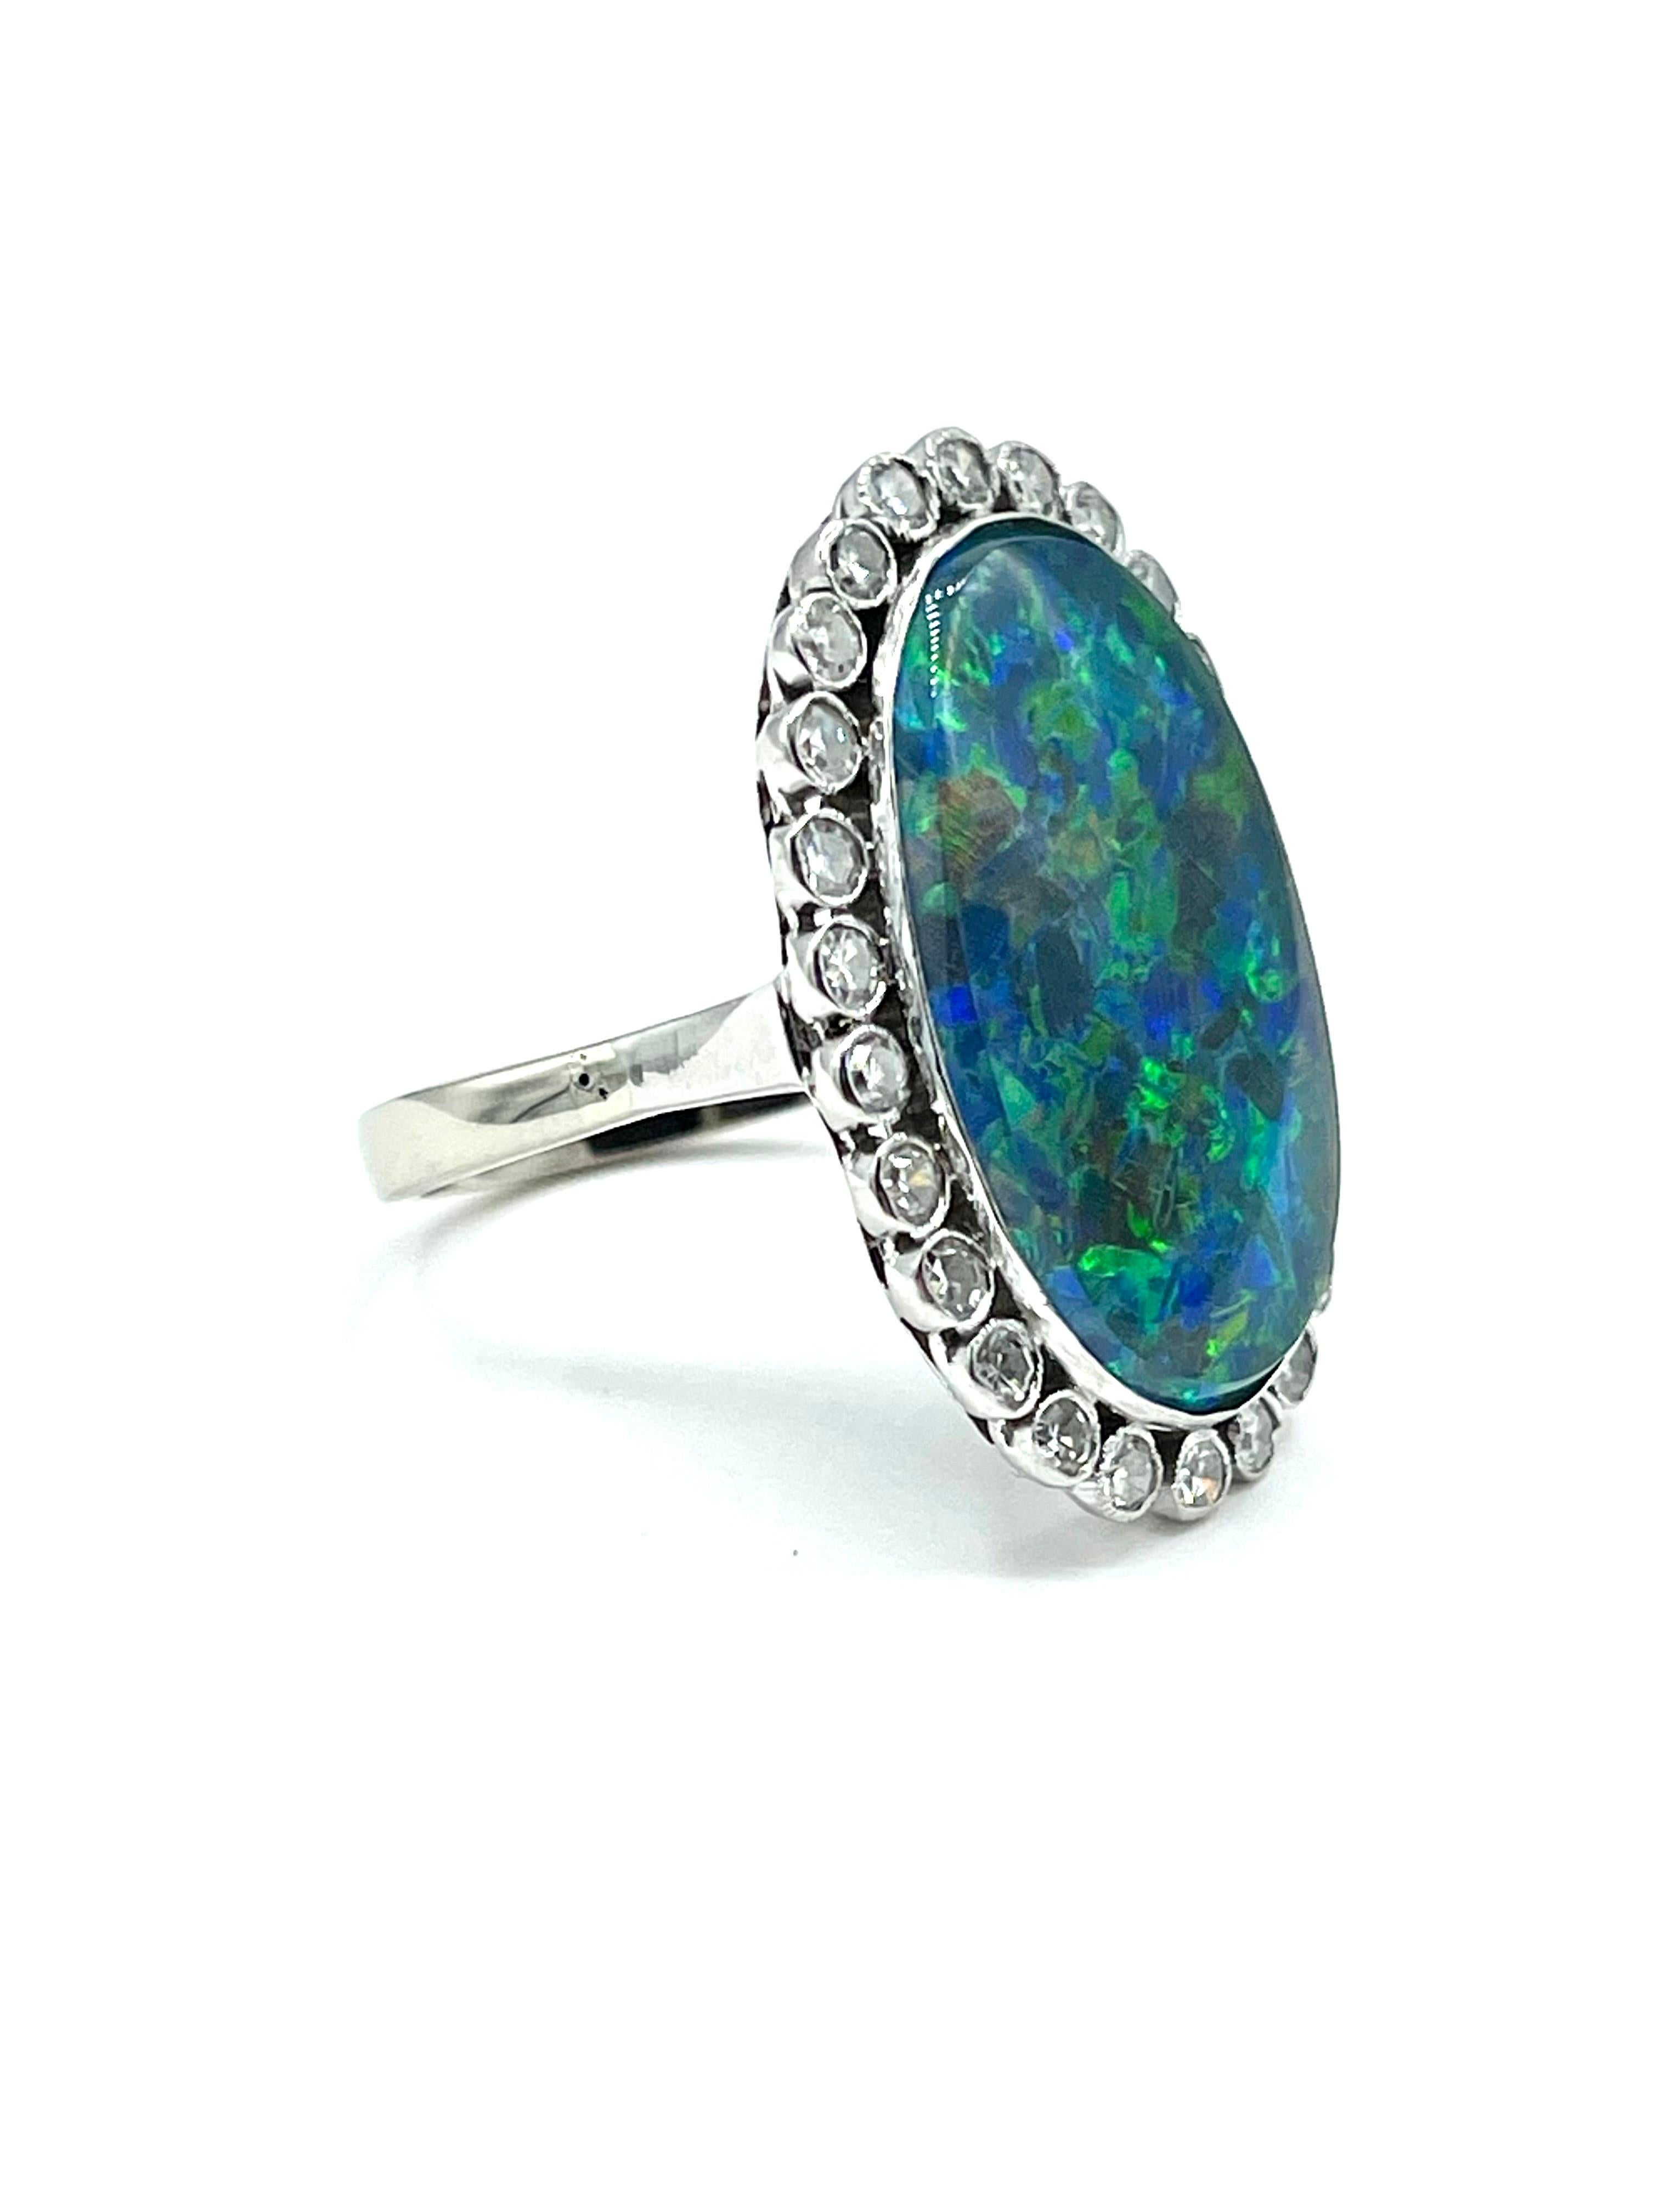 This is a an amazingly colorful cocktail ring!  The 20.00 x 14.00mm Black Opal triplet is bezel set, surrounded by a single row of bezel set single cut Diamonds weighing 0.78 carats total, all in 18K white gold.  The shank of the ring is 2.50mm.  It